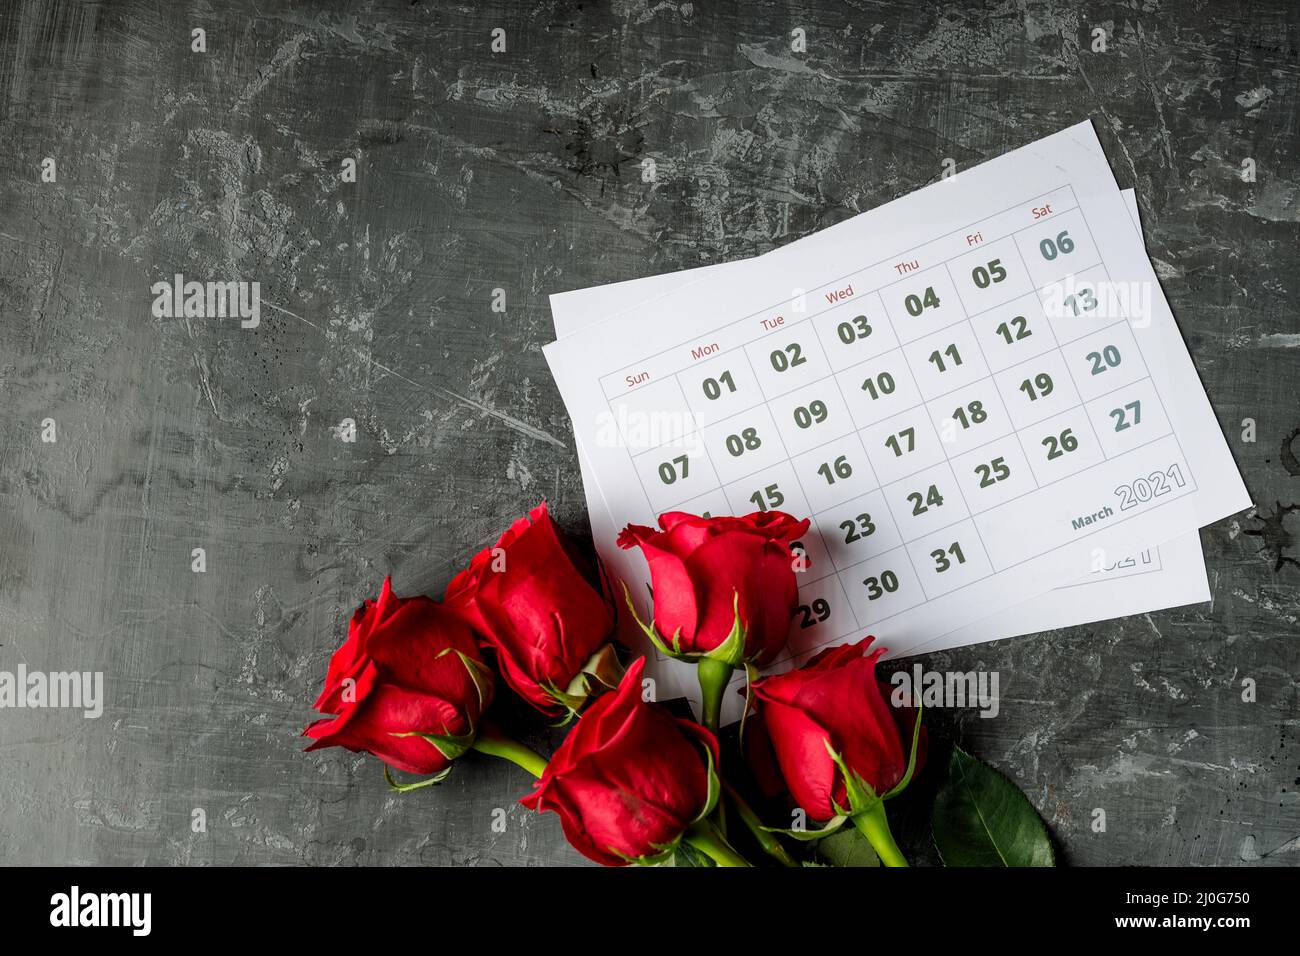 International Womans day concept with calendar pages of year 2021 of march and red roses on gray background Stock Photo